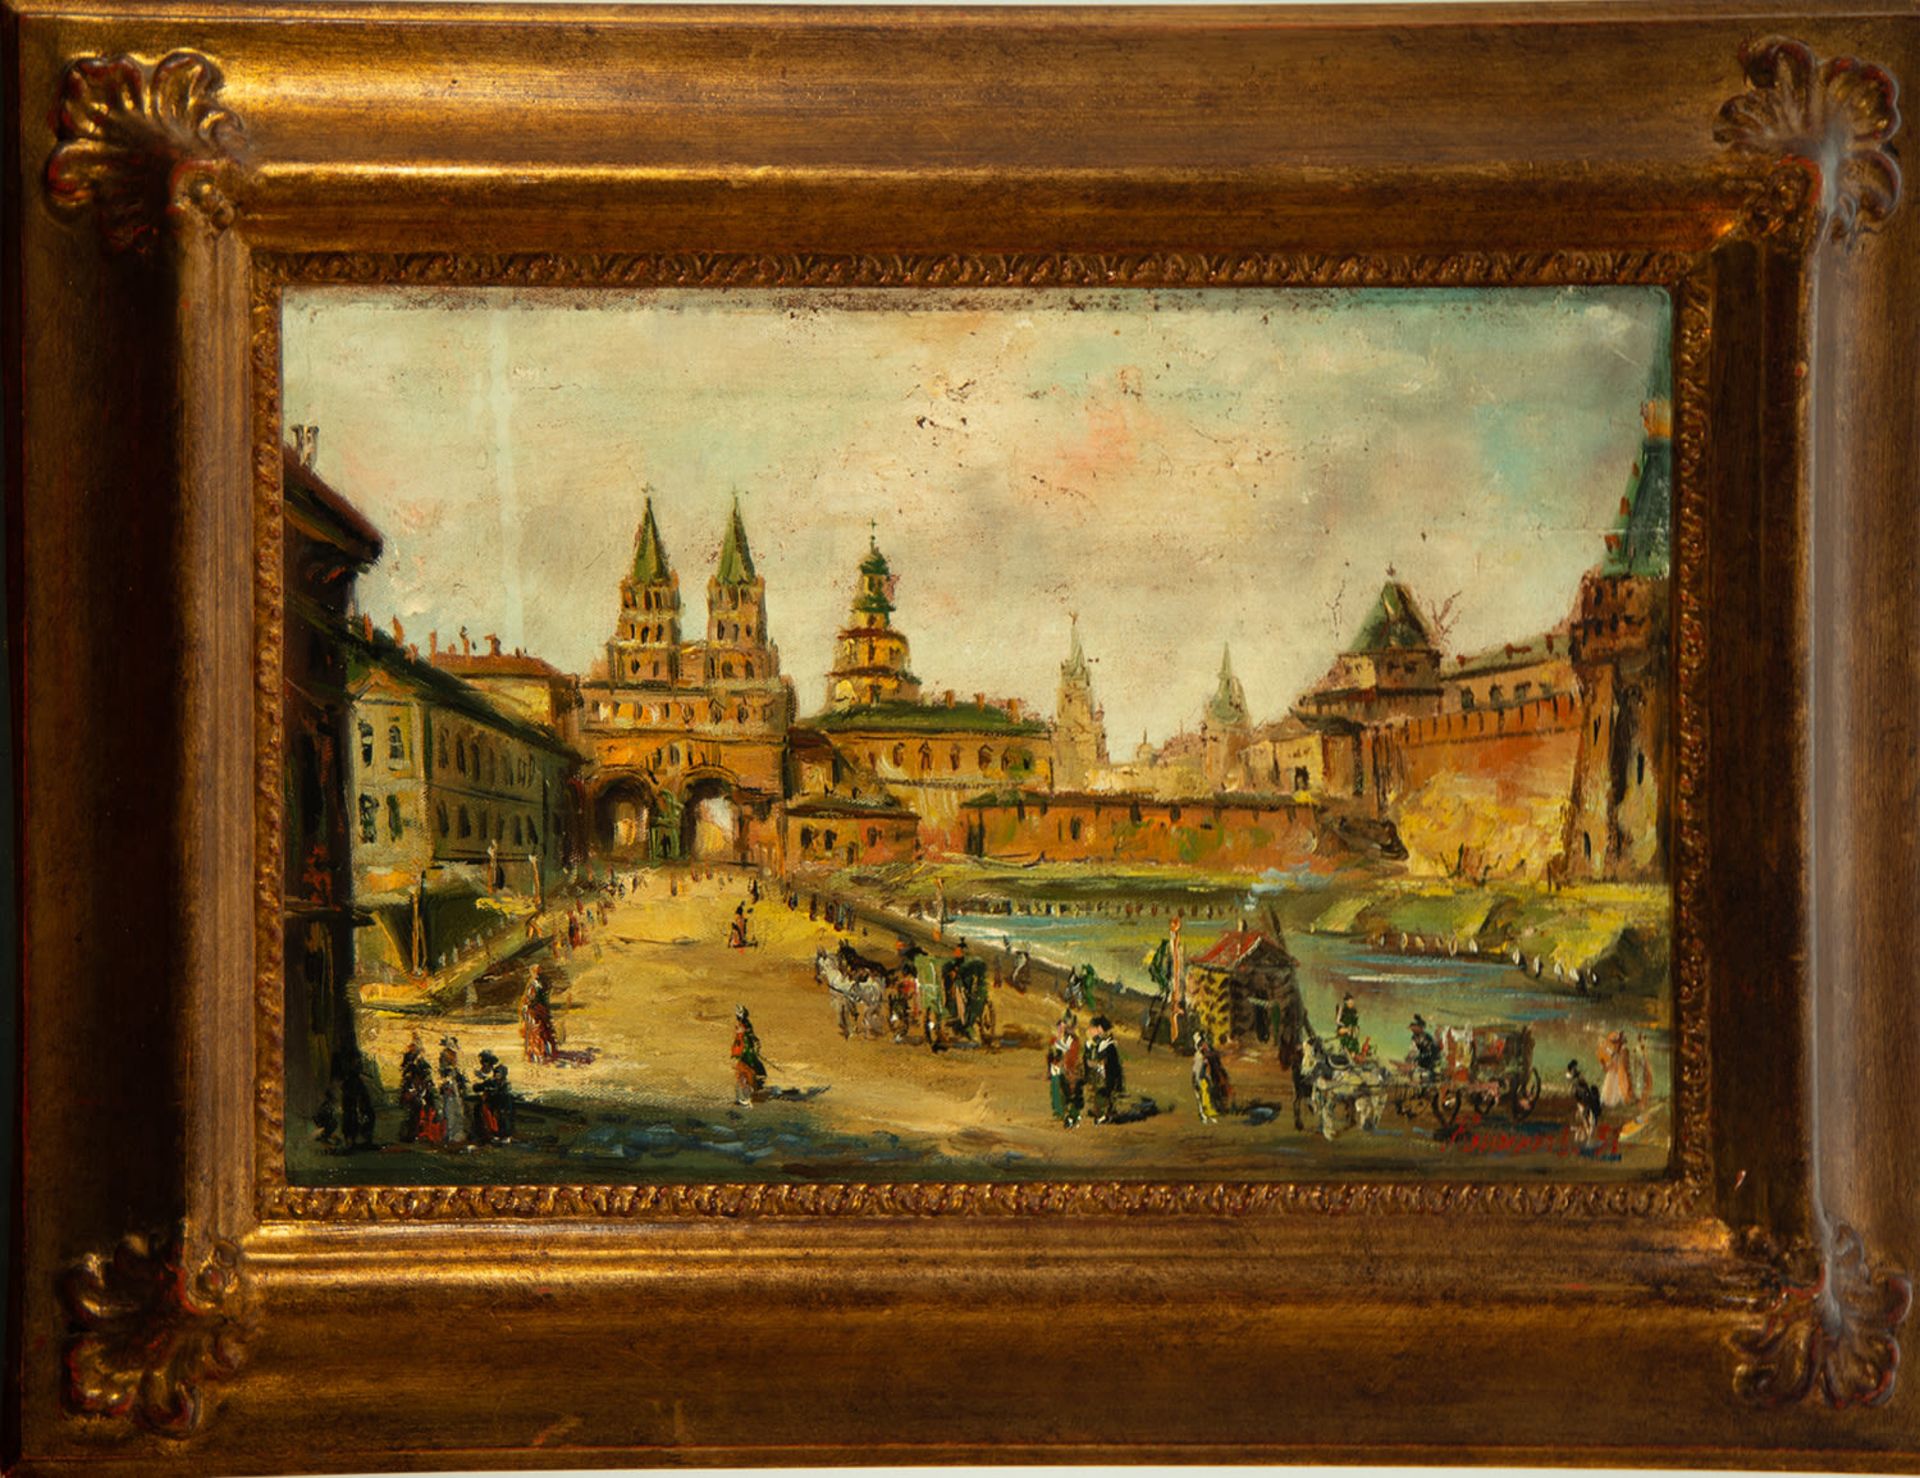 Preparatory work for a view of Moscow, 19th century Russian school